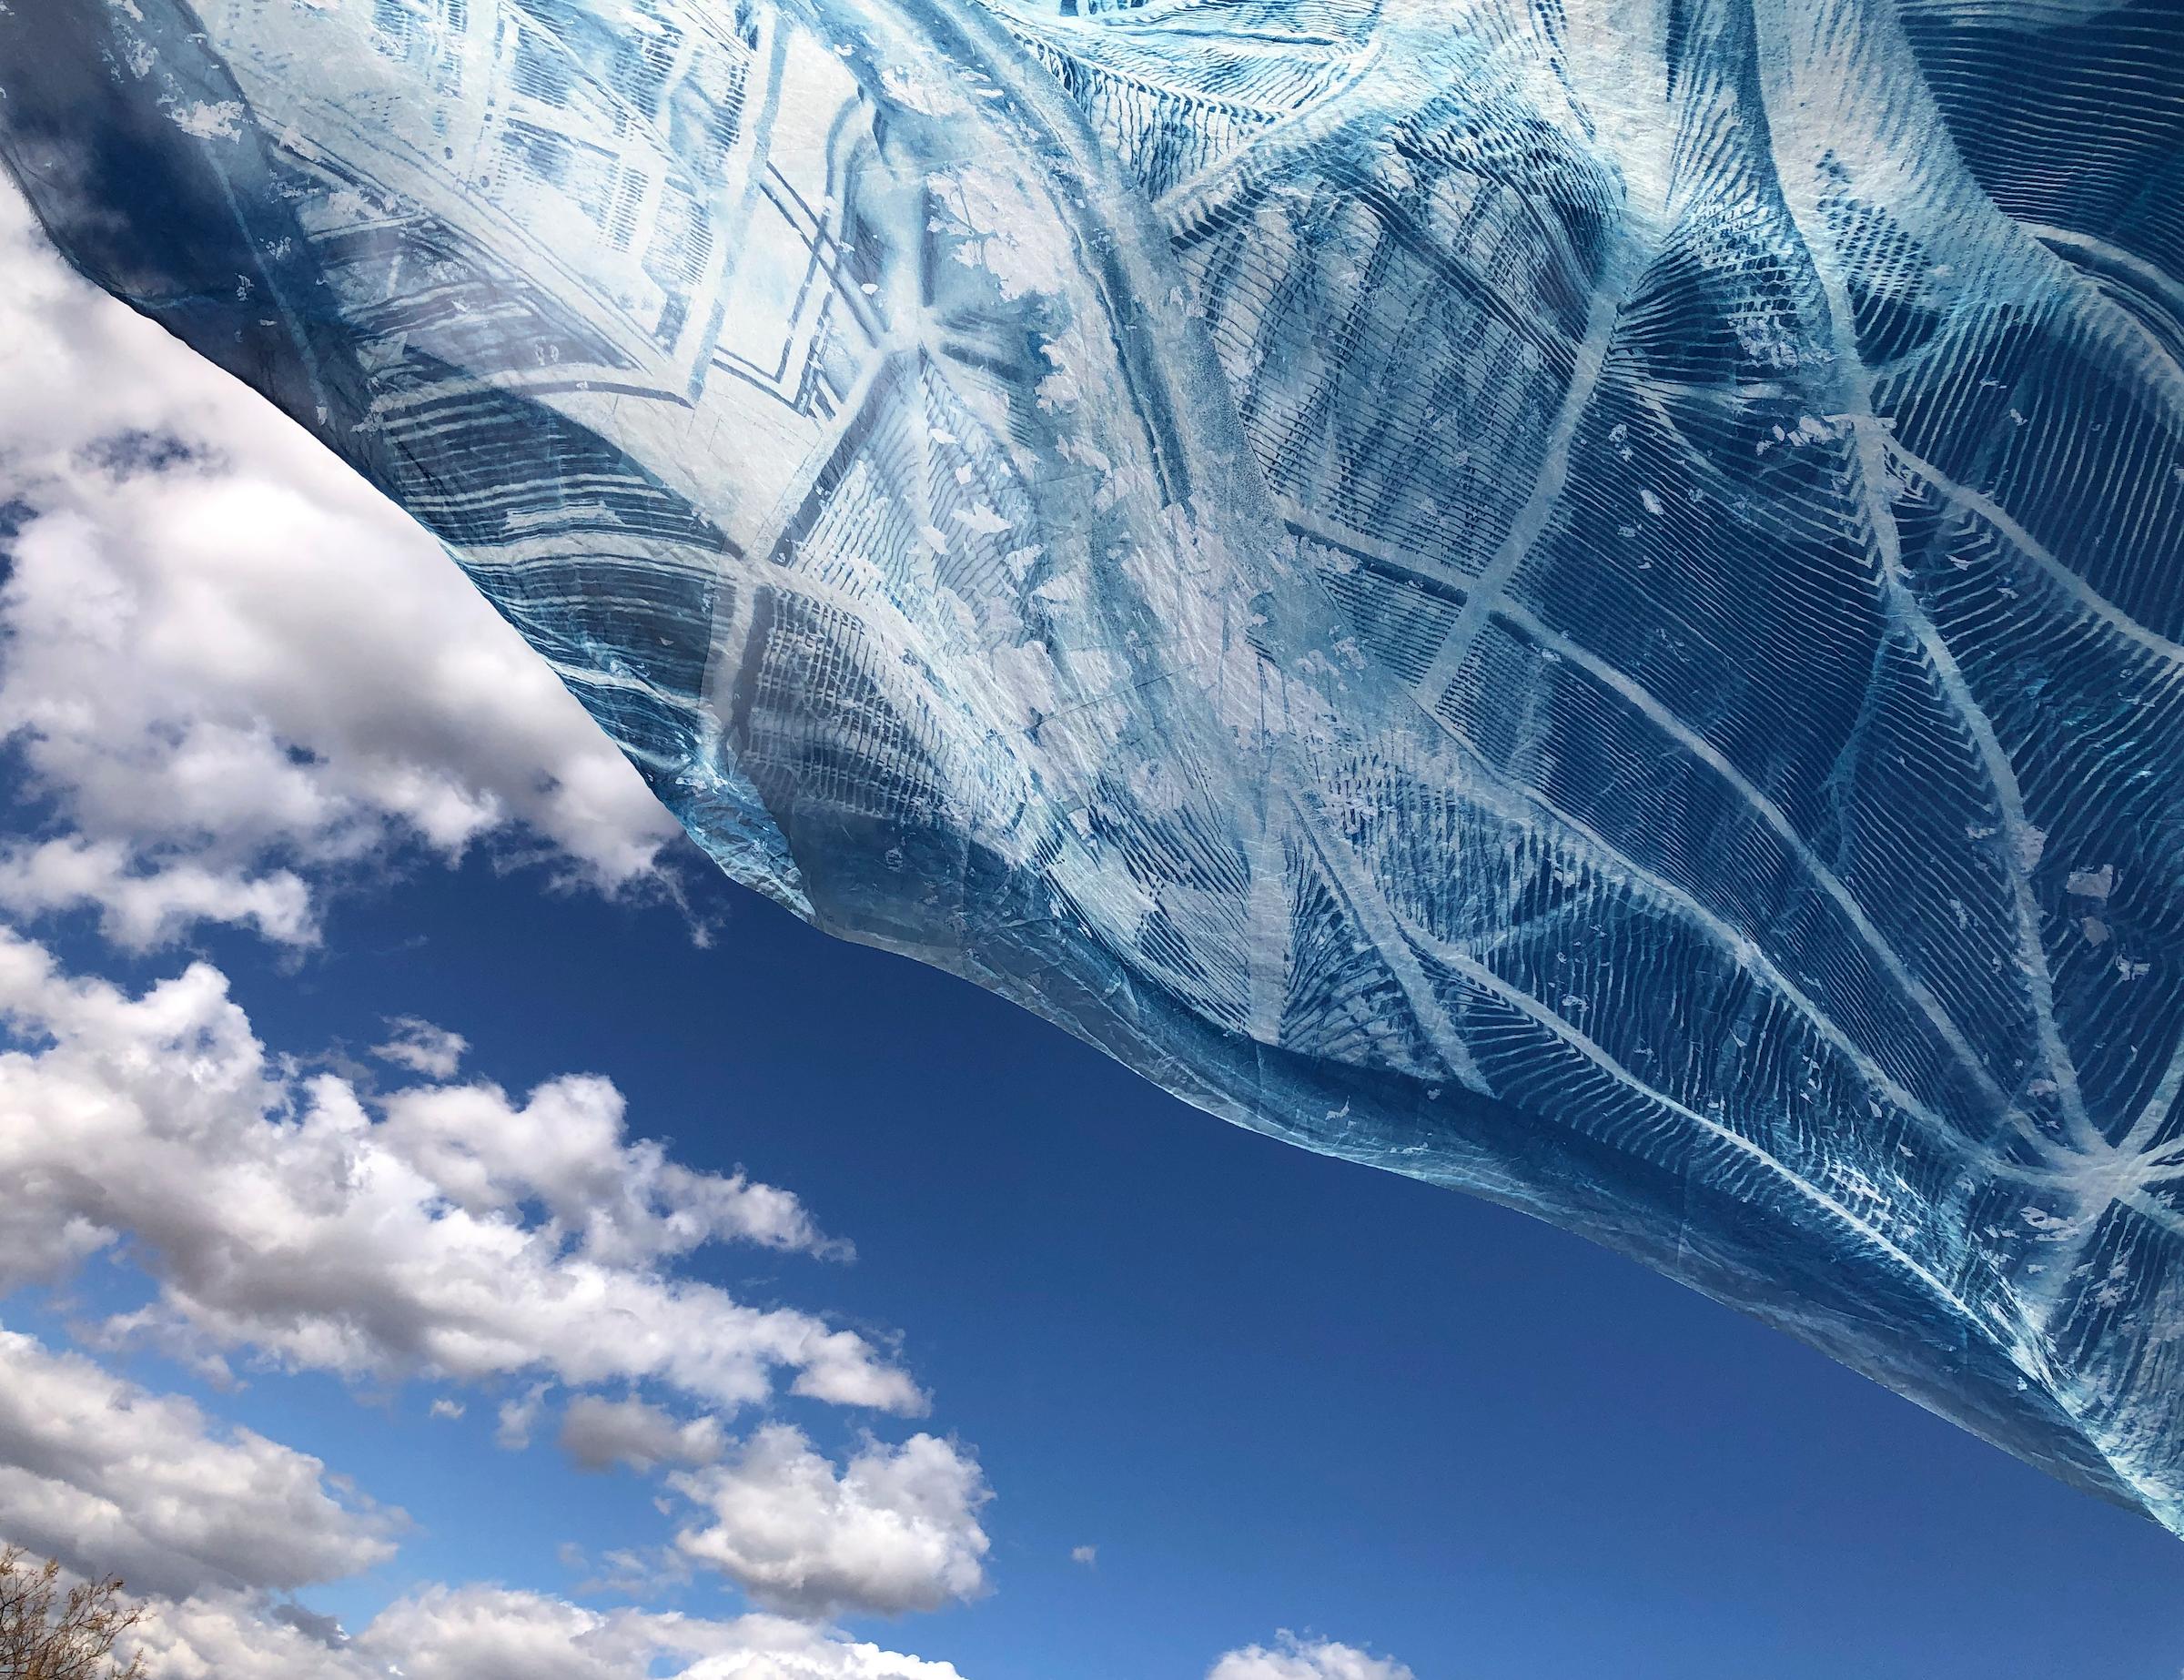 Marie Craig Abstract Photograph - "Rising 3", contemporary, abstract, sky, clouds, blue, cyanotype, photograph